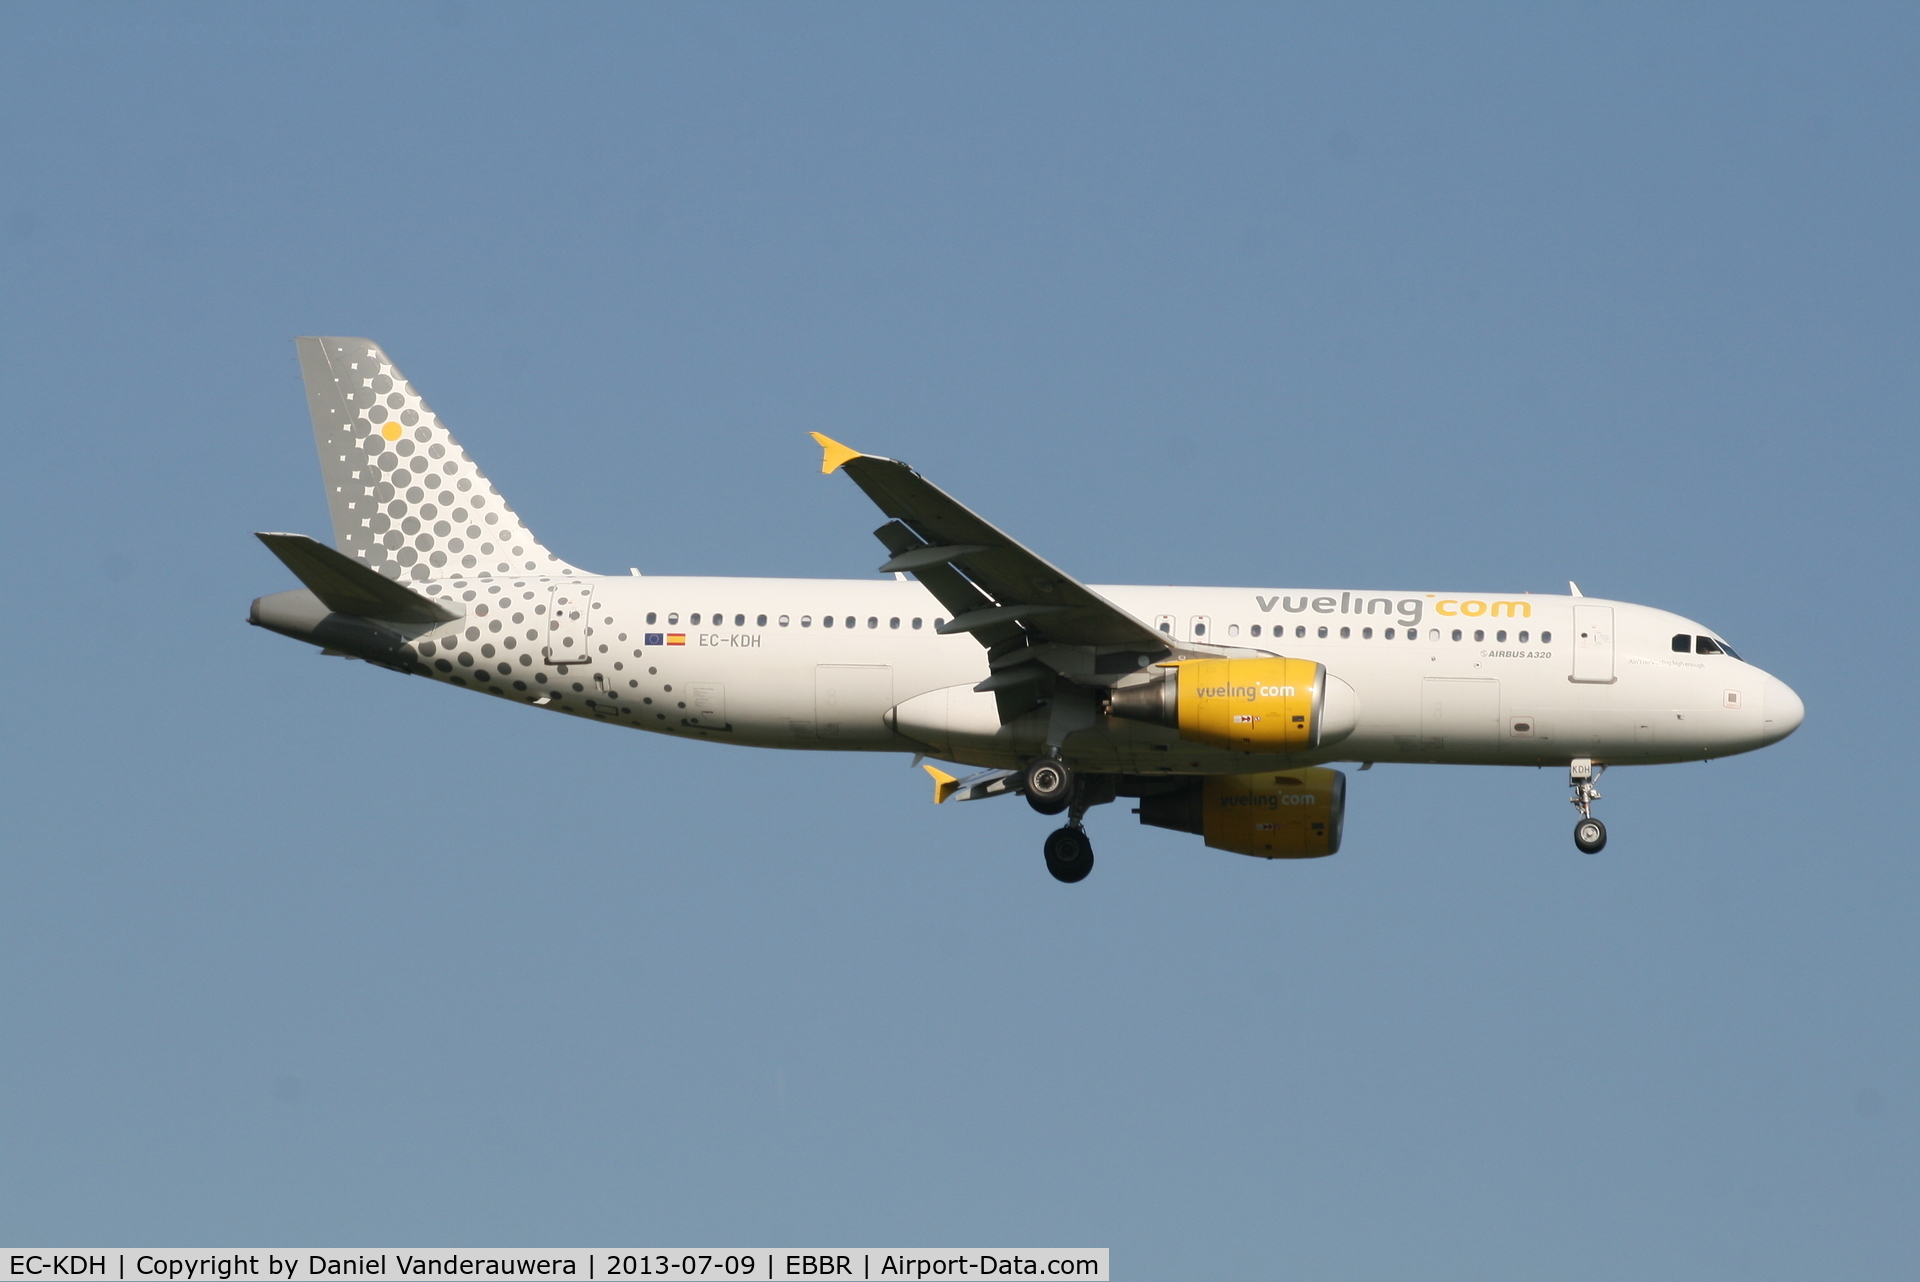 EC-KDH, 2007 Airbus A320-214 C/N 3083, Arrival of flight VY8988 to RWY 02